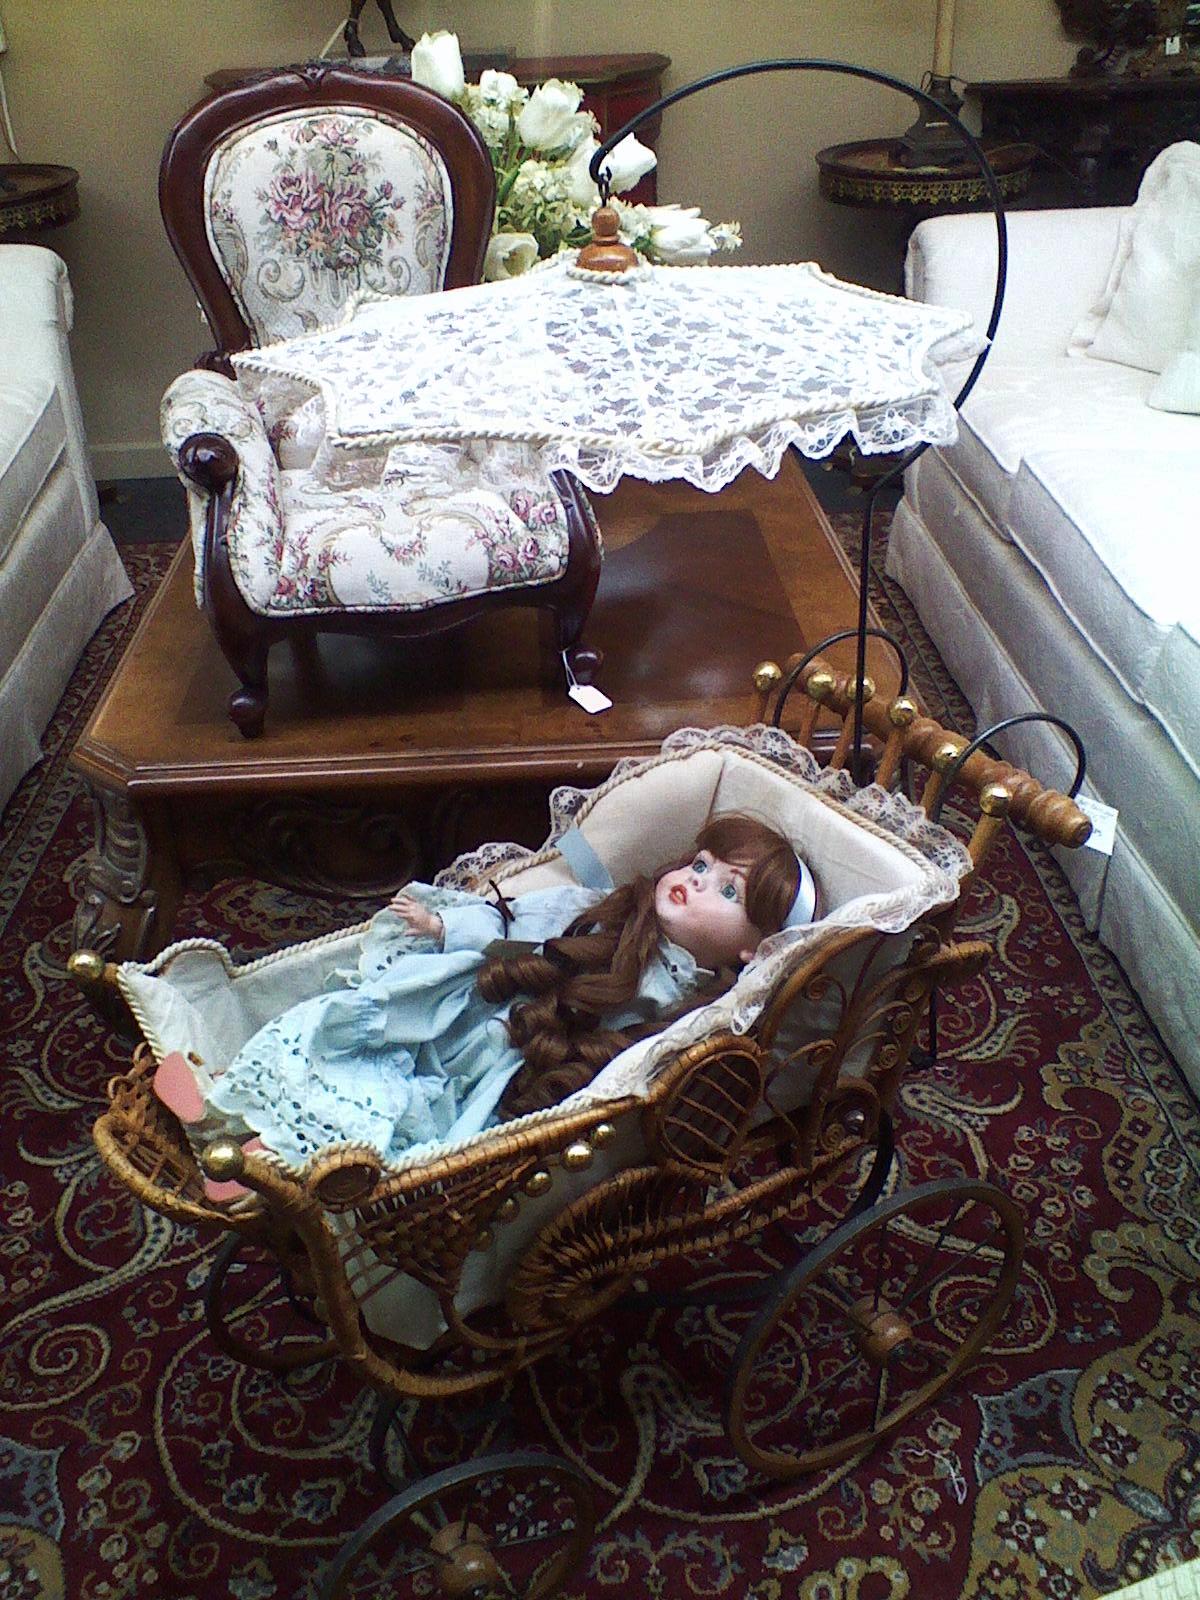 This antique Victorian pram!! Gorgeous! Reminded me of Samantha.